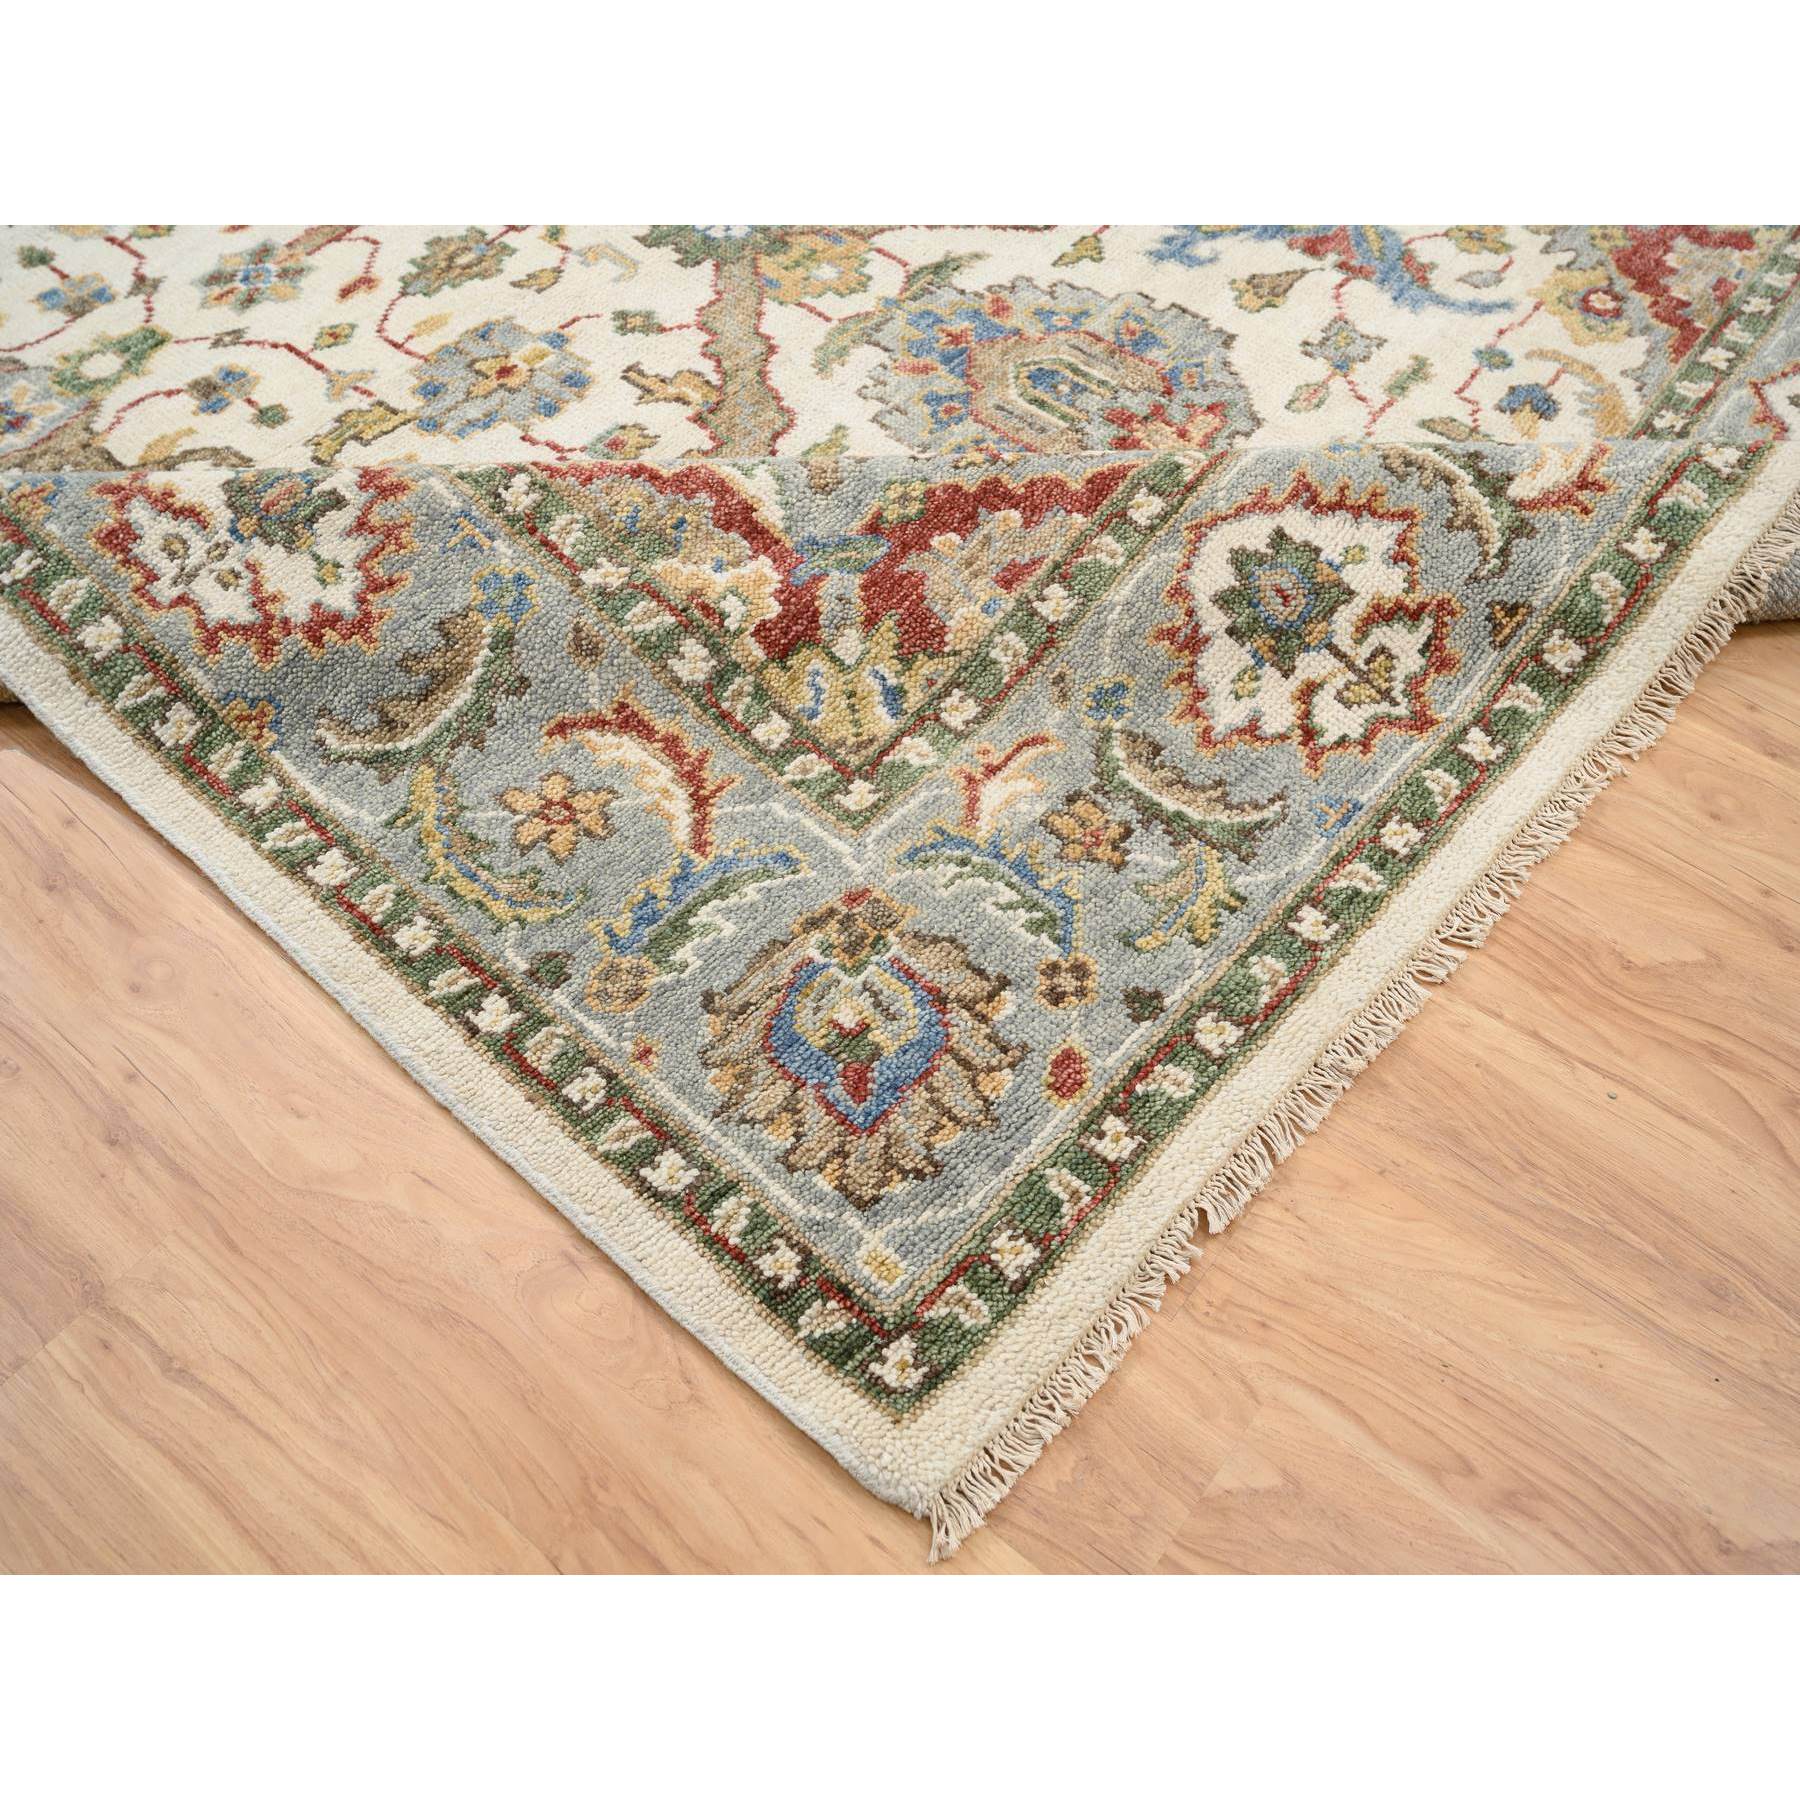 8'10"x12'3" Ivory, Oushak Design Supple Collection, Pure Wool Hand Woven, Oriental Rug 